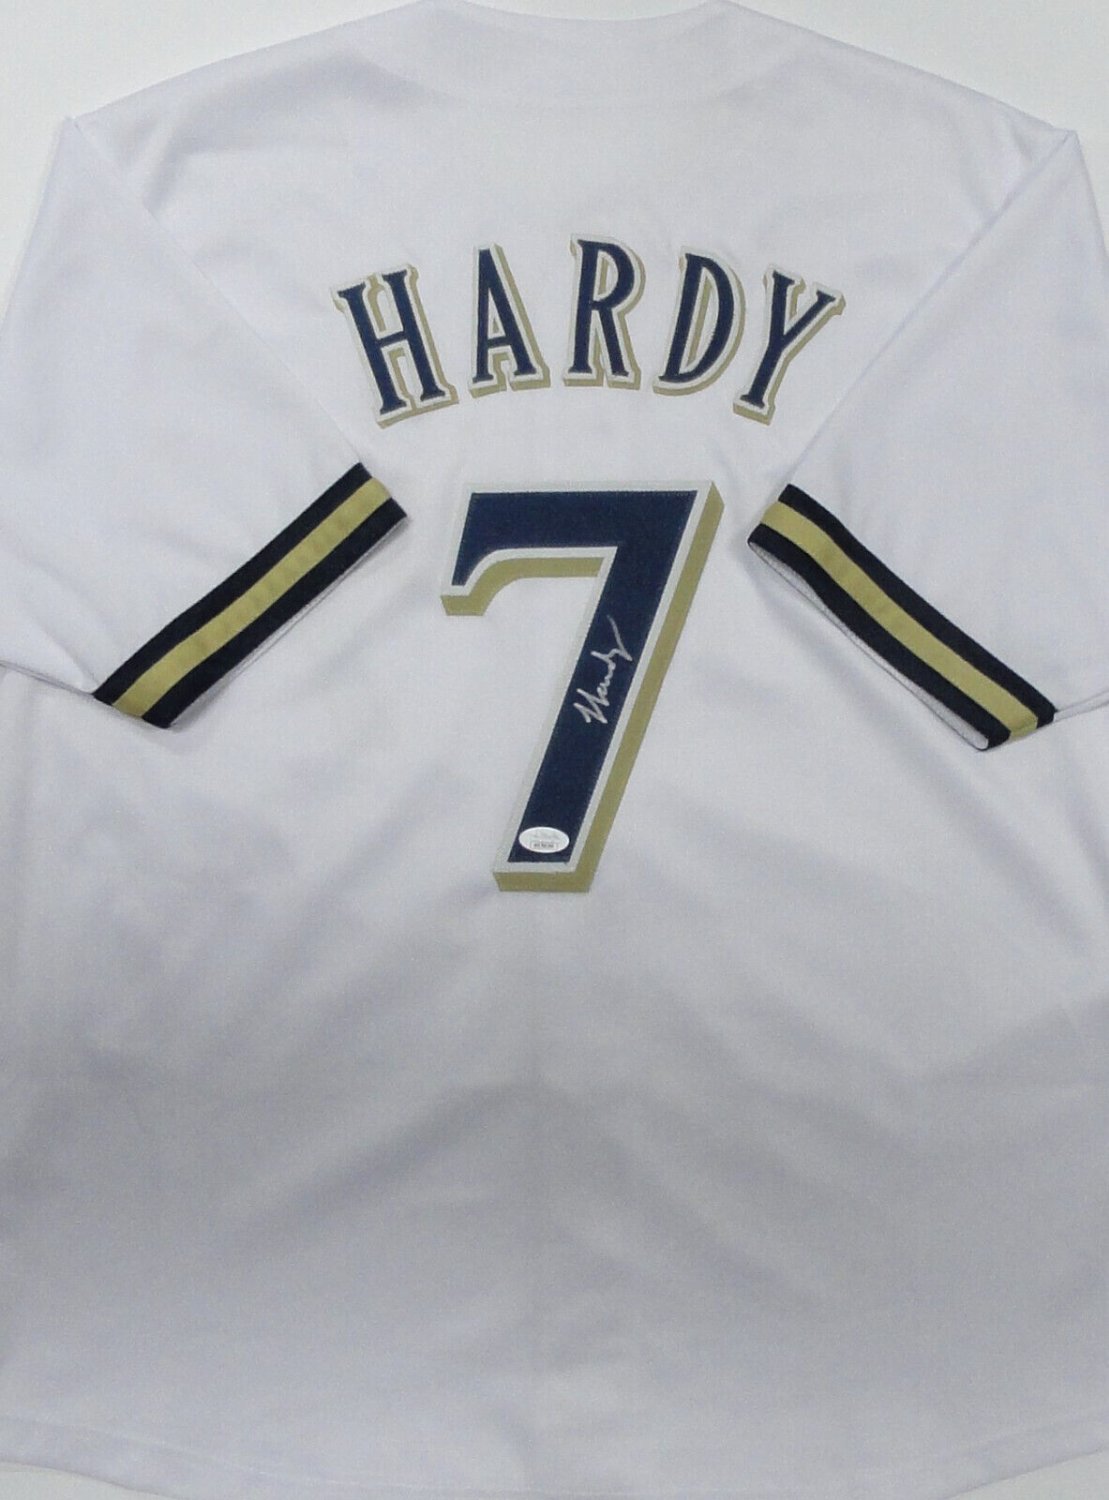 J.J. Hardy Autographed Signed Brewers All Star Custom Replica White Jersey  Auto - JSA